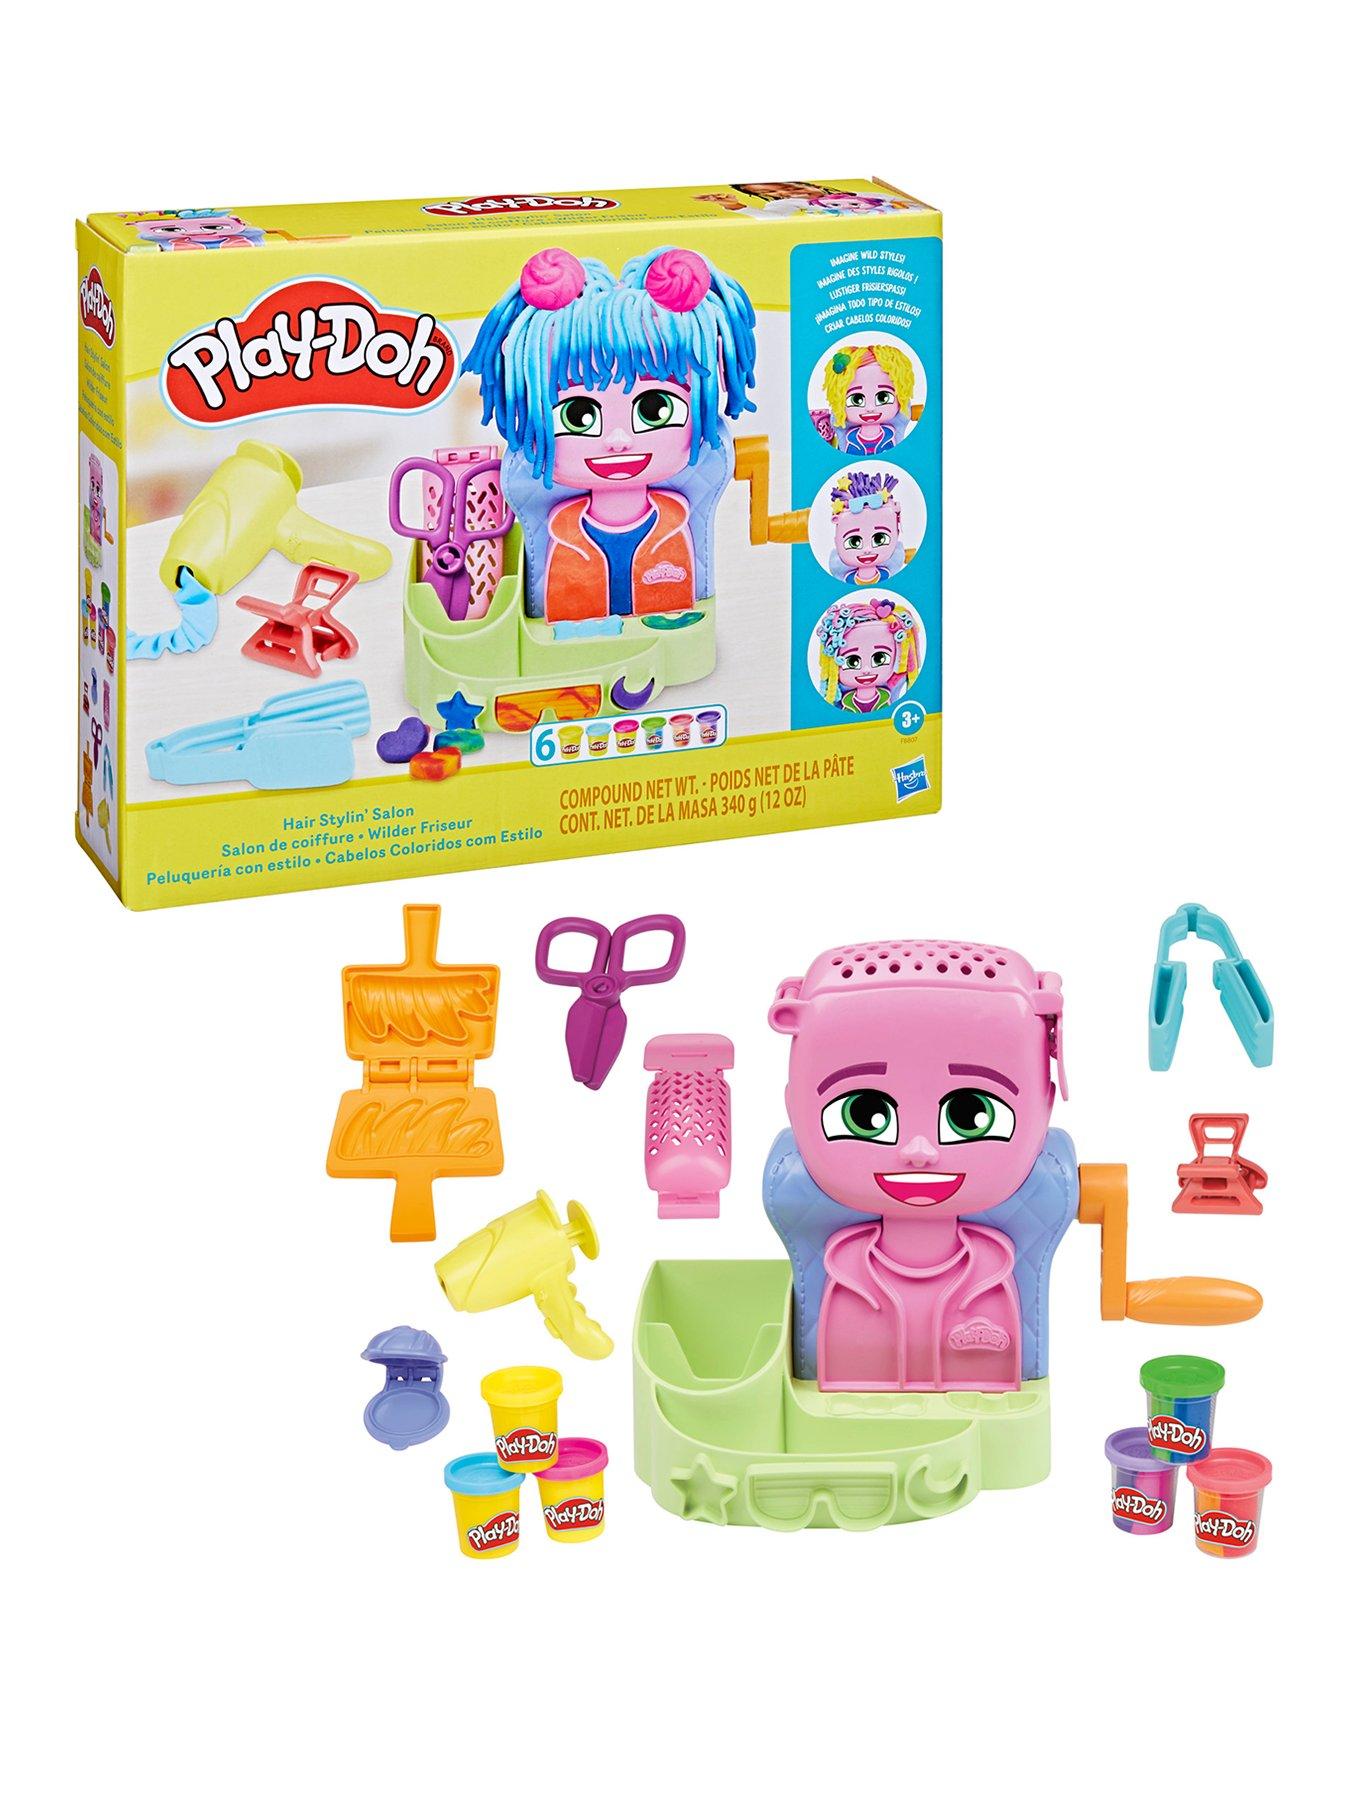 Play-Doh Cash Register By Hasbro: Includes 4 Cups of Play-Doh